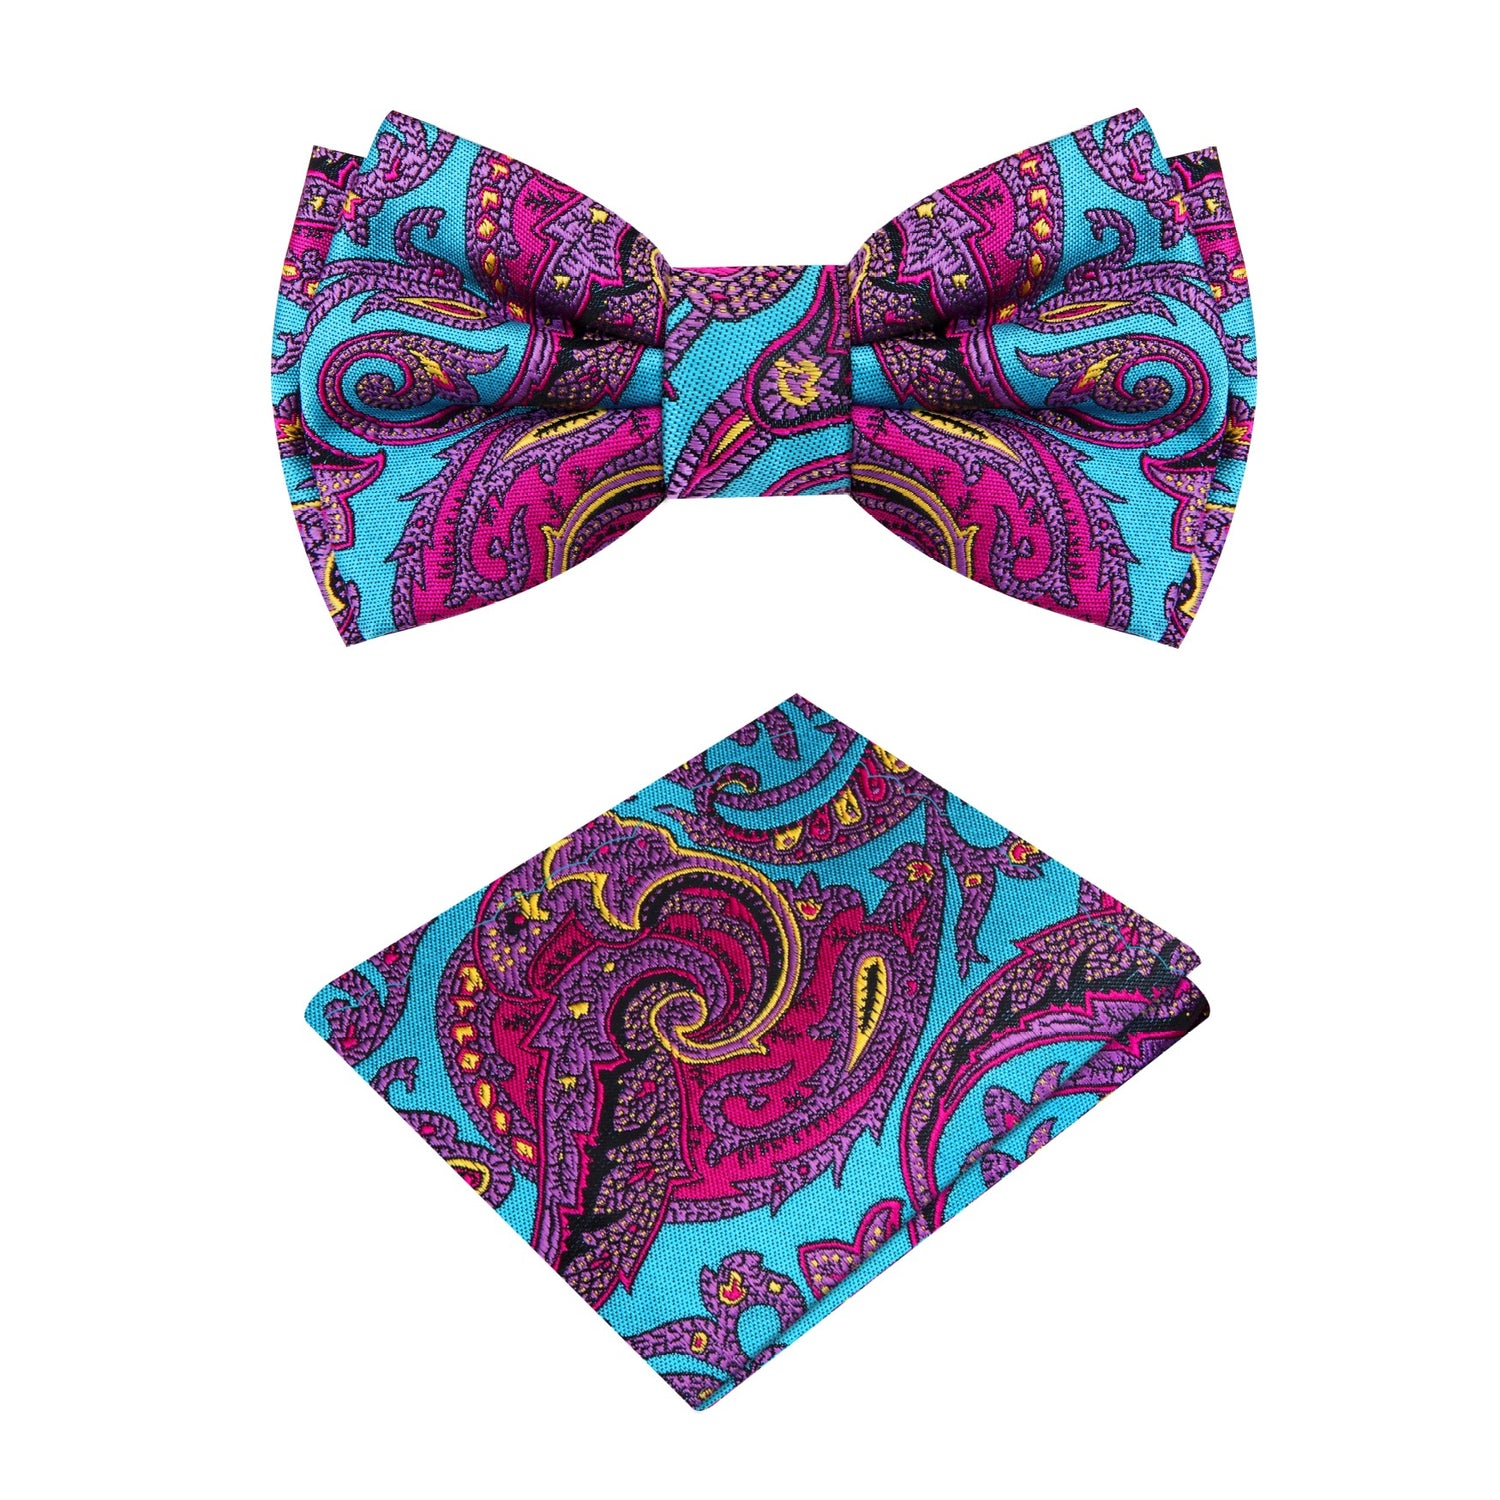 A Light Blue, Pink Detailed Paisley Pattern Silk Self Tie Bow Tie, Matching Pocket Square